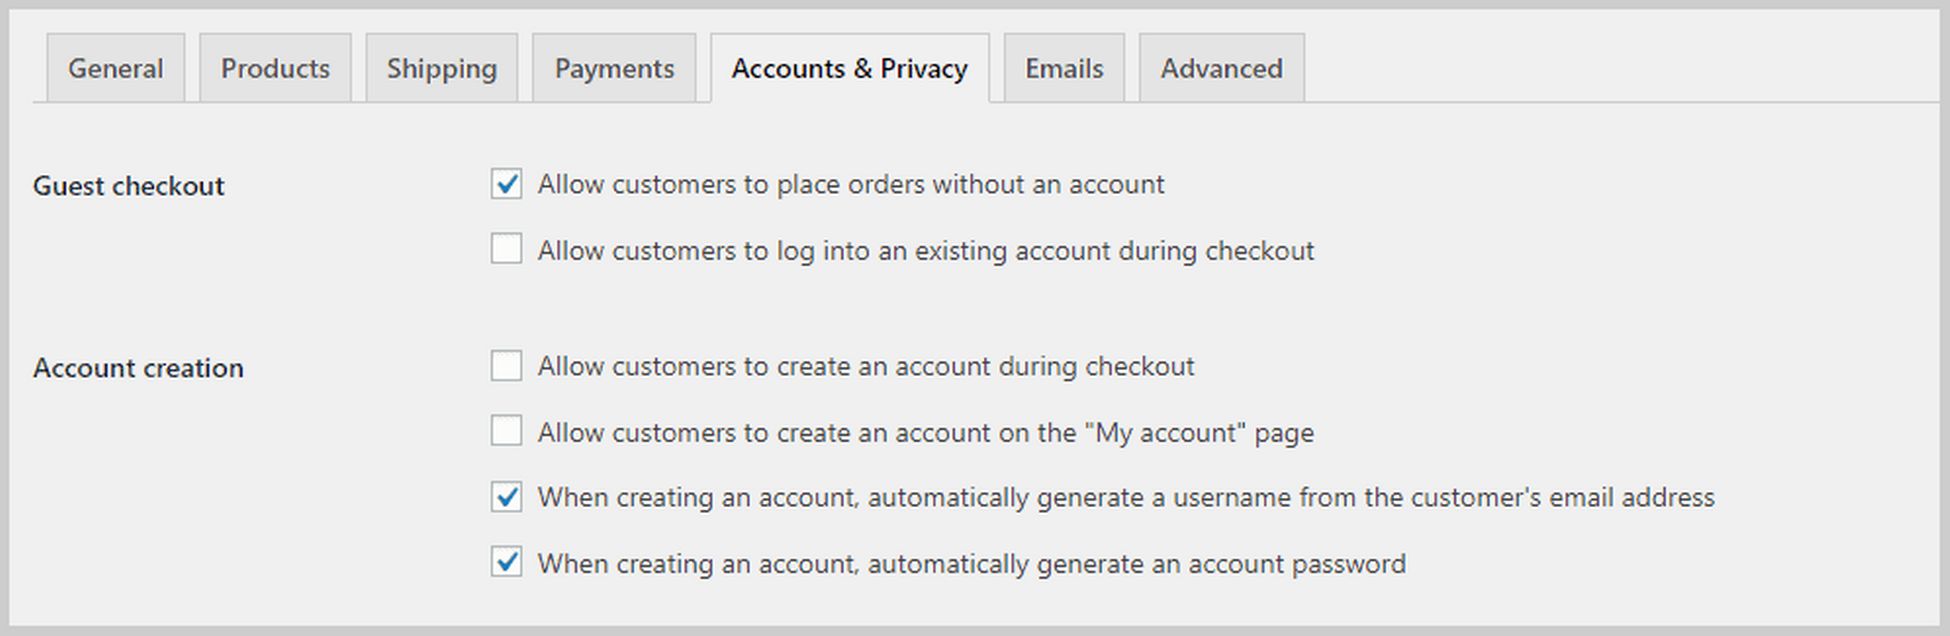 accounts and privacy